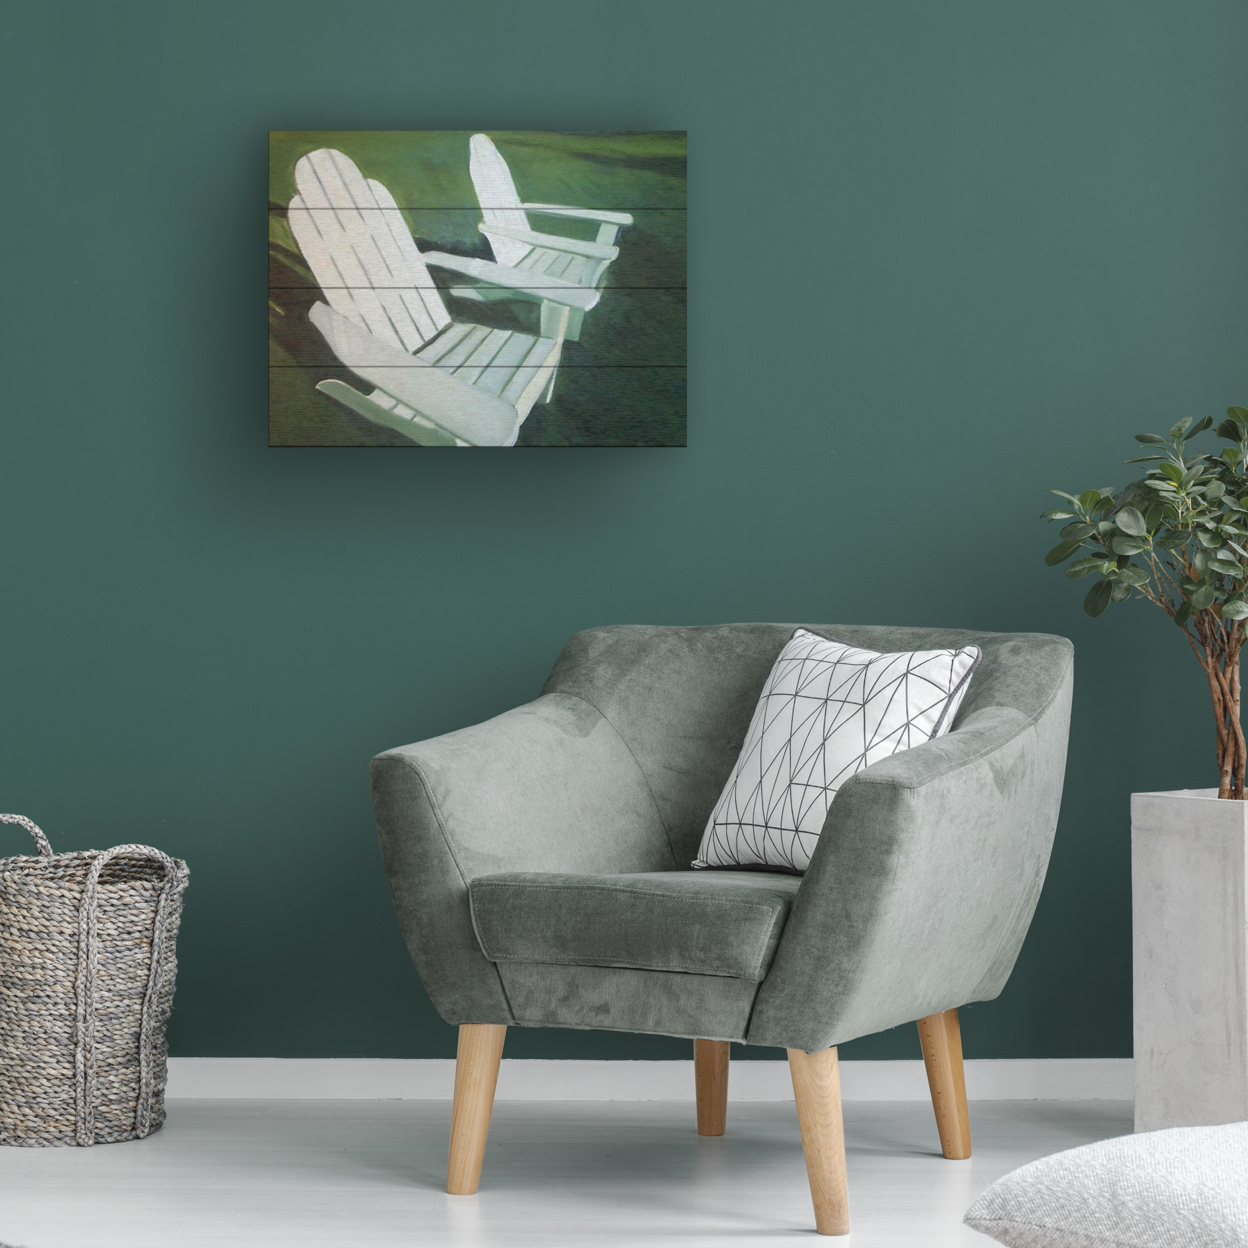 Wall Art 12 X 16 Inches Titled Lawn Chairs Ready To Hang Printed On Wooden Planks